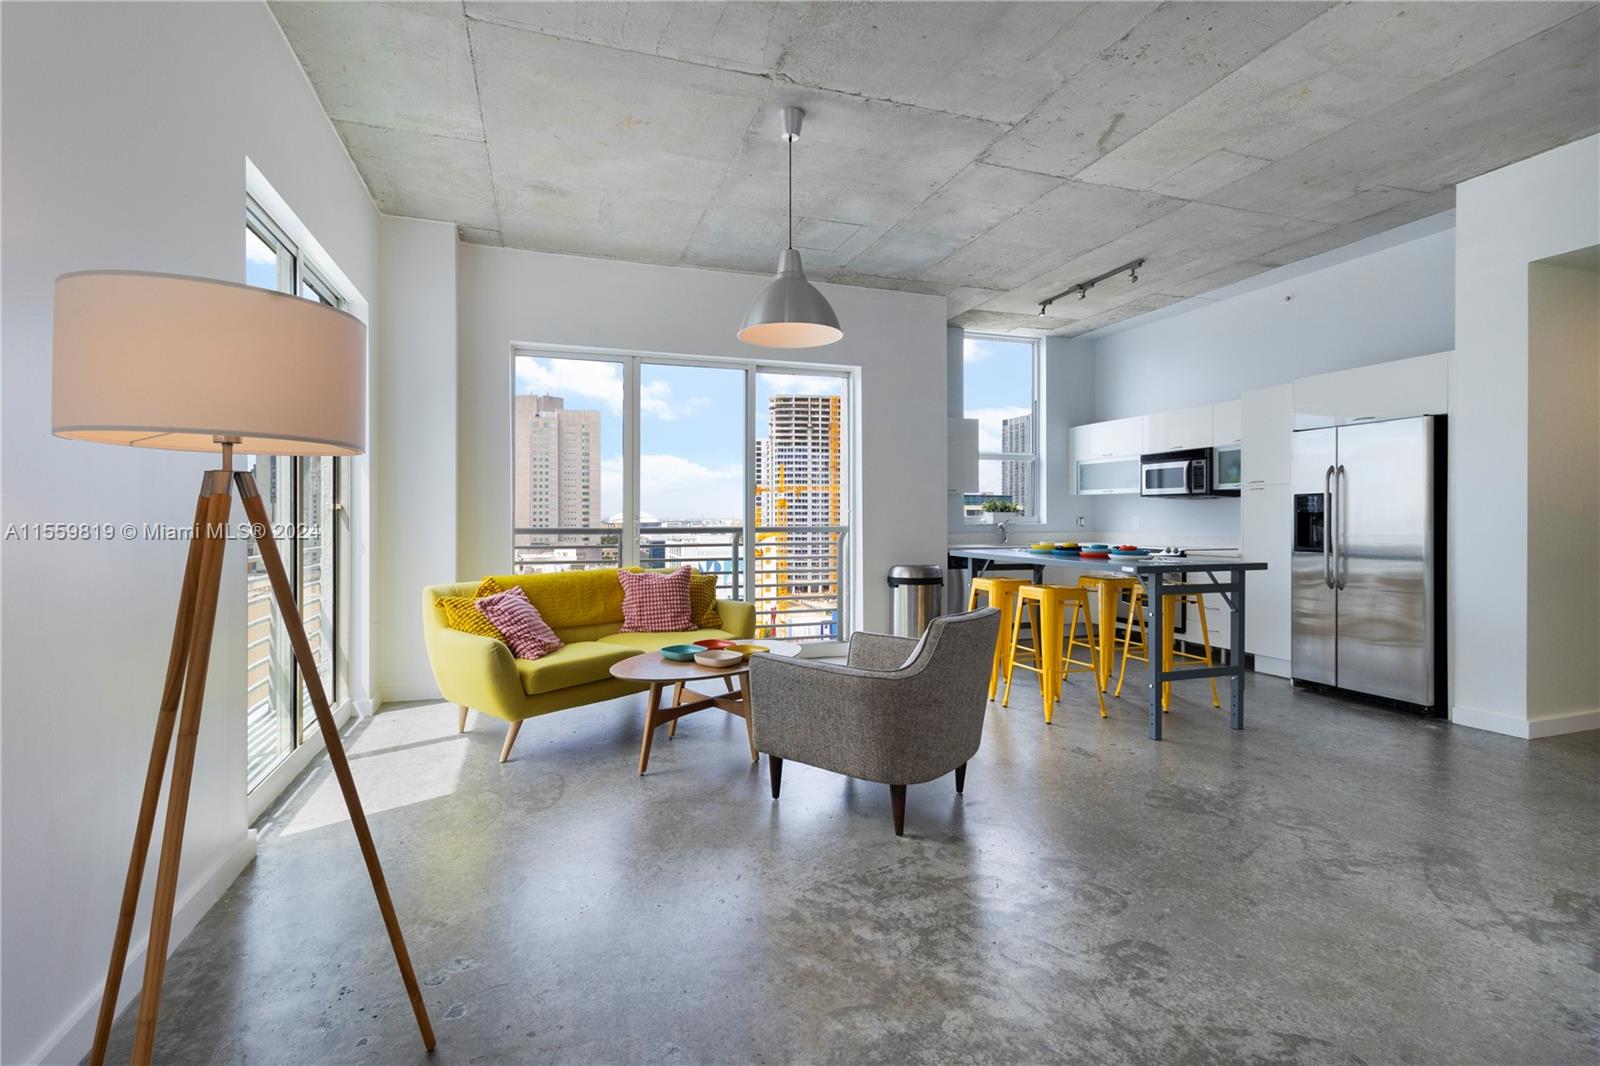 Discover the best of Miami in this spacious, open-concept corner unit at The Loft Downtown II.Enjoy fantastic 18th-floor westward views of downtown as you stretch out in comfort with 2 large bedrooms,2 full baths, and 10-ft ceilings. Conveniences include in-unit laundry, a brand-new water heater, recently revamped A/C, stainless steel appliances, and much more.  Secure building features a rooftop pool and spa with ocean views, full gym and sauna, ground floor lap pool, and 24-hour concierge services.Step out the front door and you’ll find the Metromover station that stops at the building for convenient transportation around the entire downtown area.Walk 2 blocks south to Flagler for gourmet drinks and dining, or head 2 blocks east for the excitement of Biscayne Boulevard and Bayfront Park.